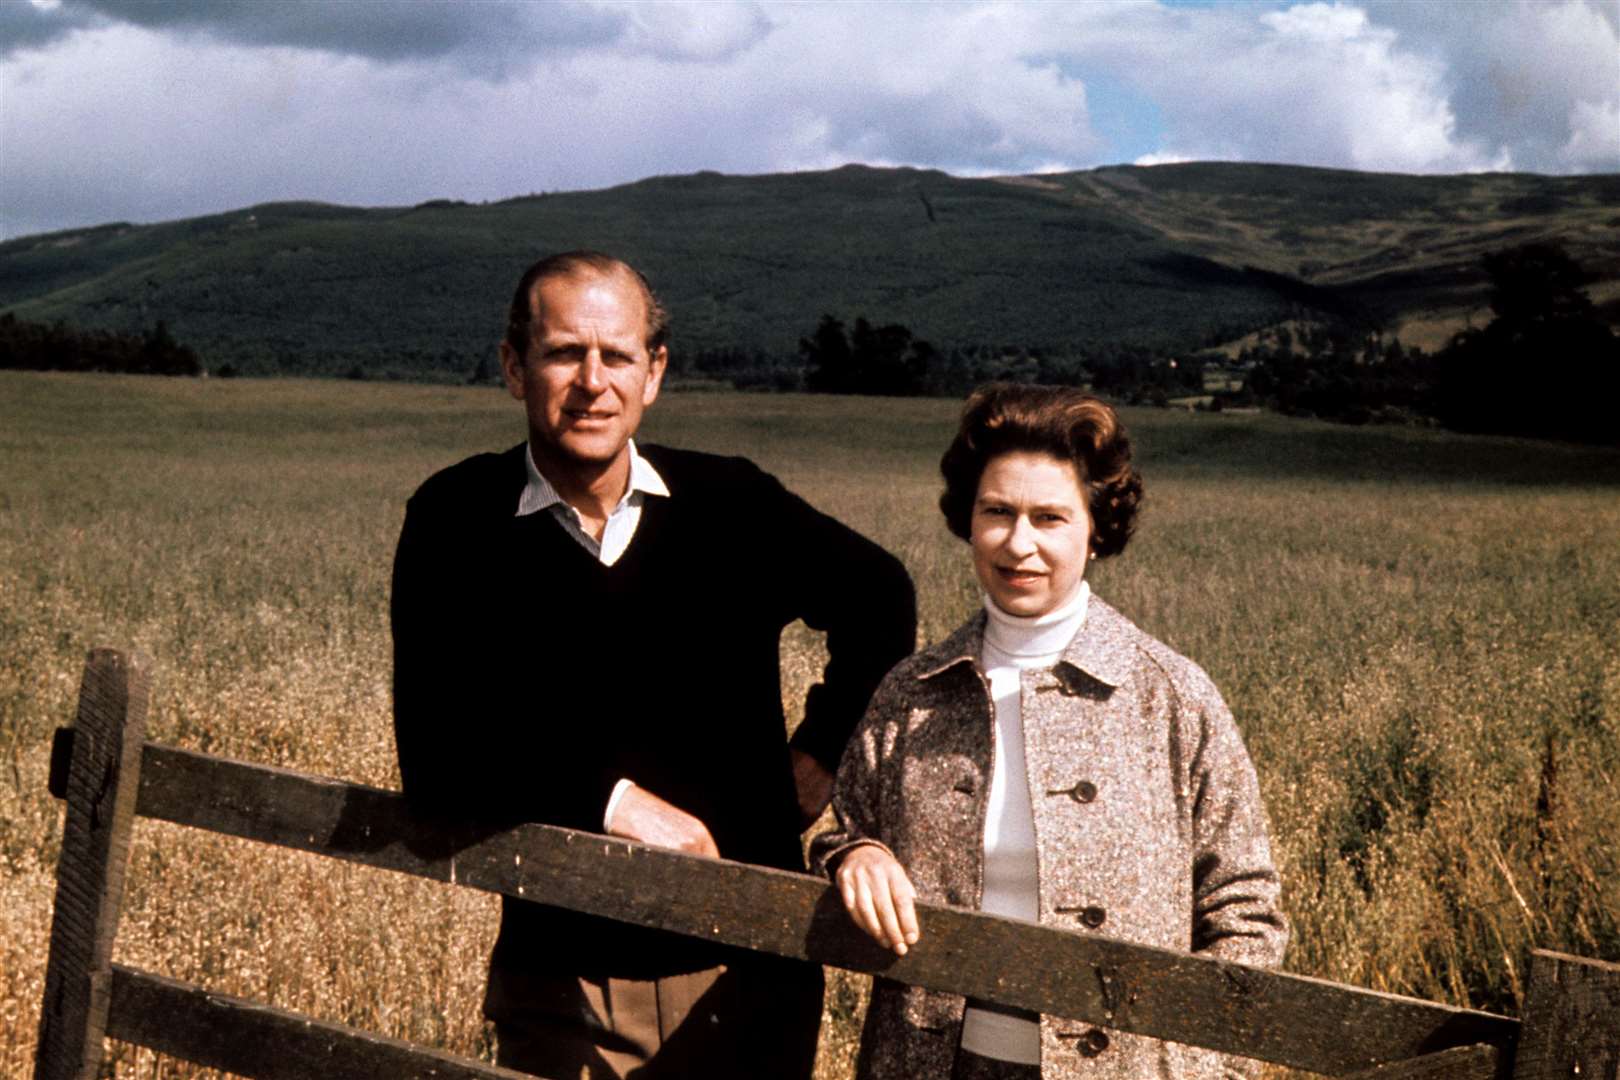 The Queen and Philip pictured at Balmoral in 1972 (PA)